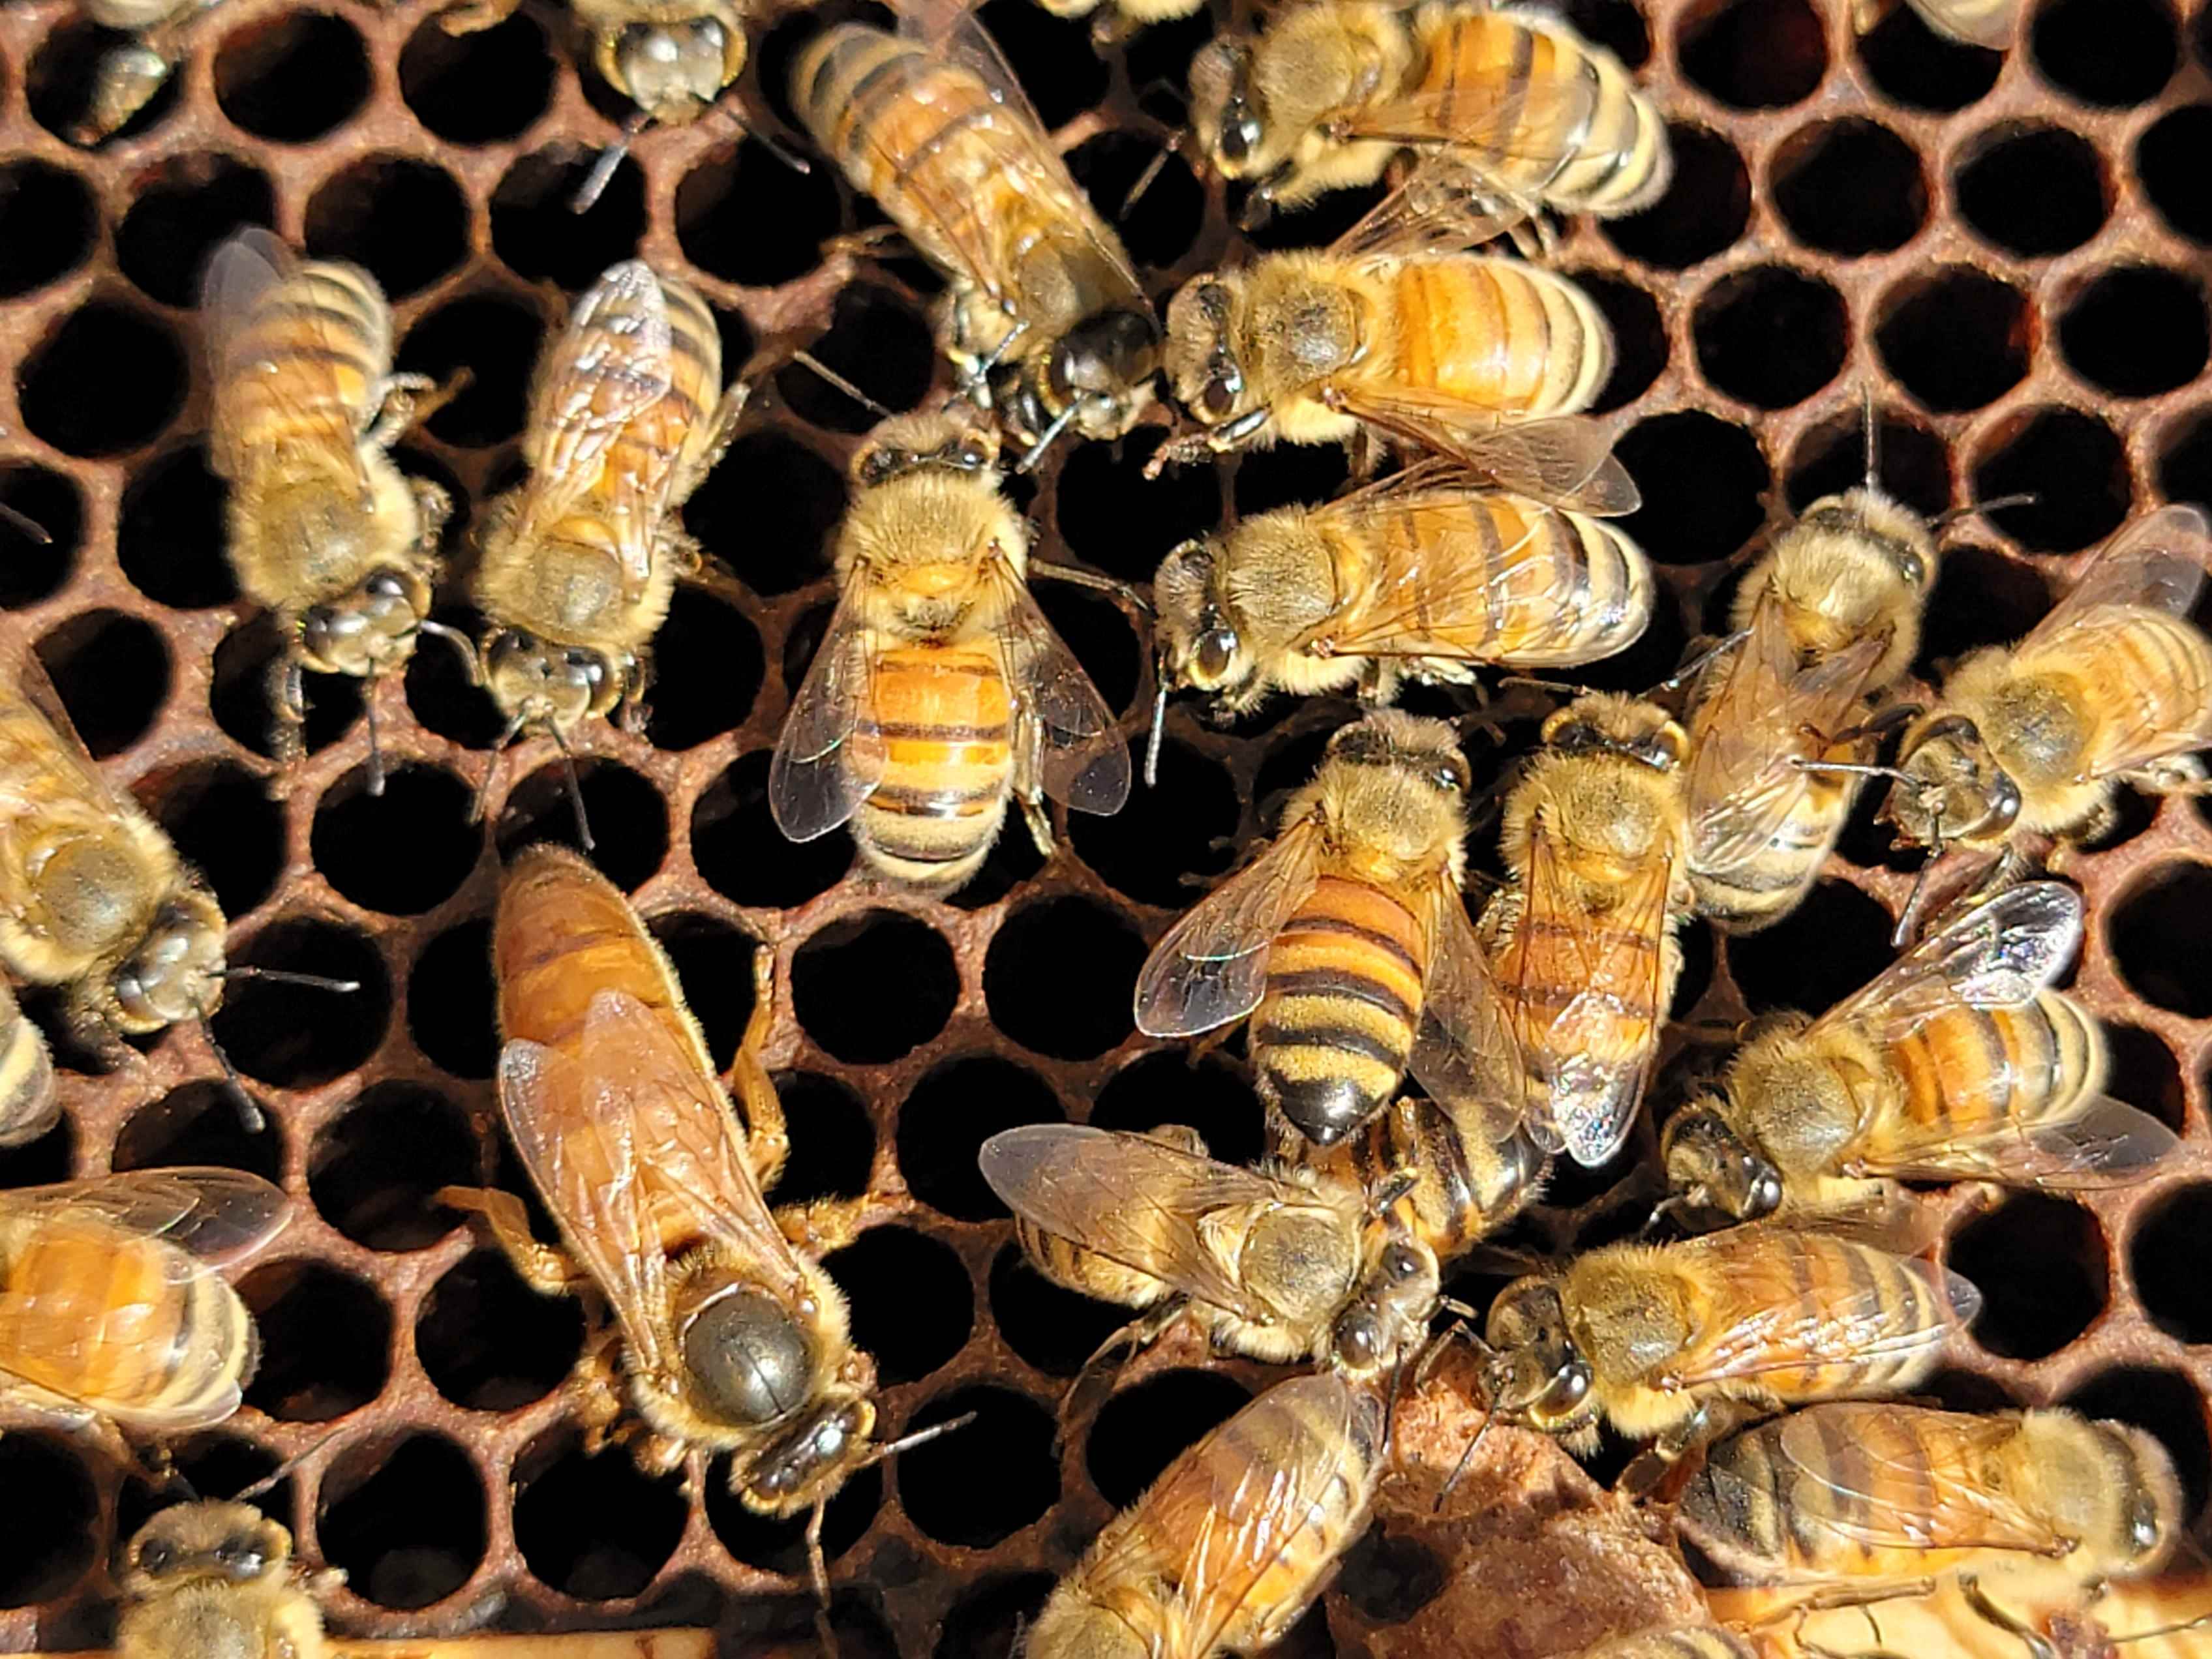 Can you tell which is the queen honey bee?